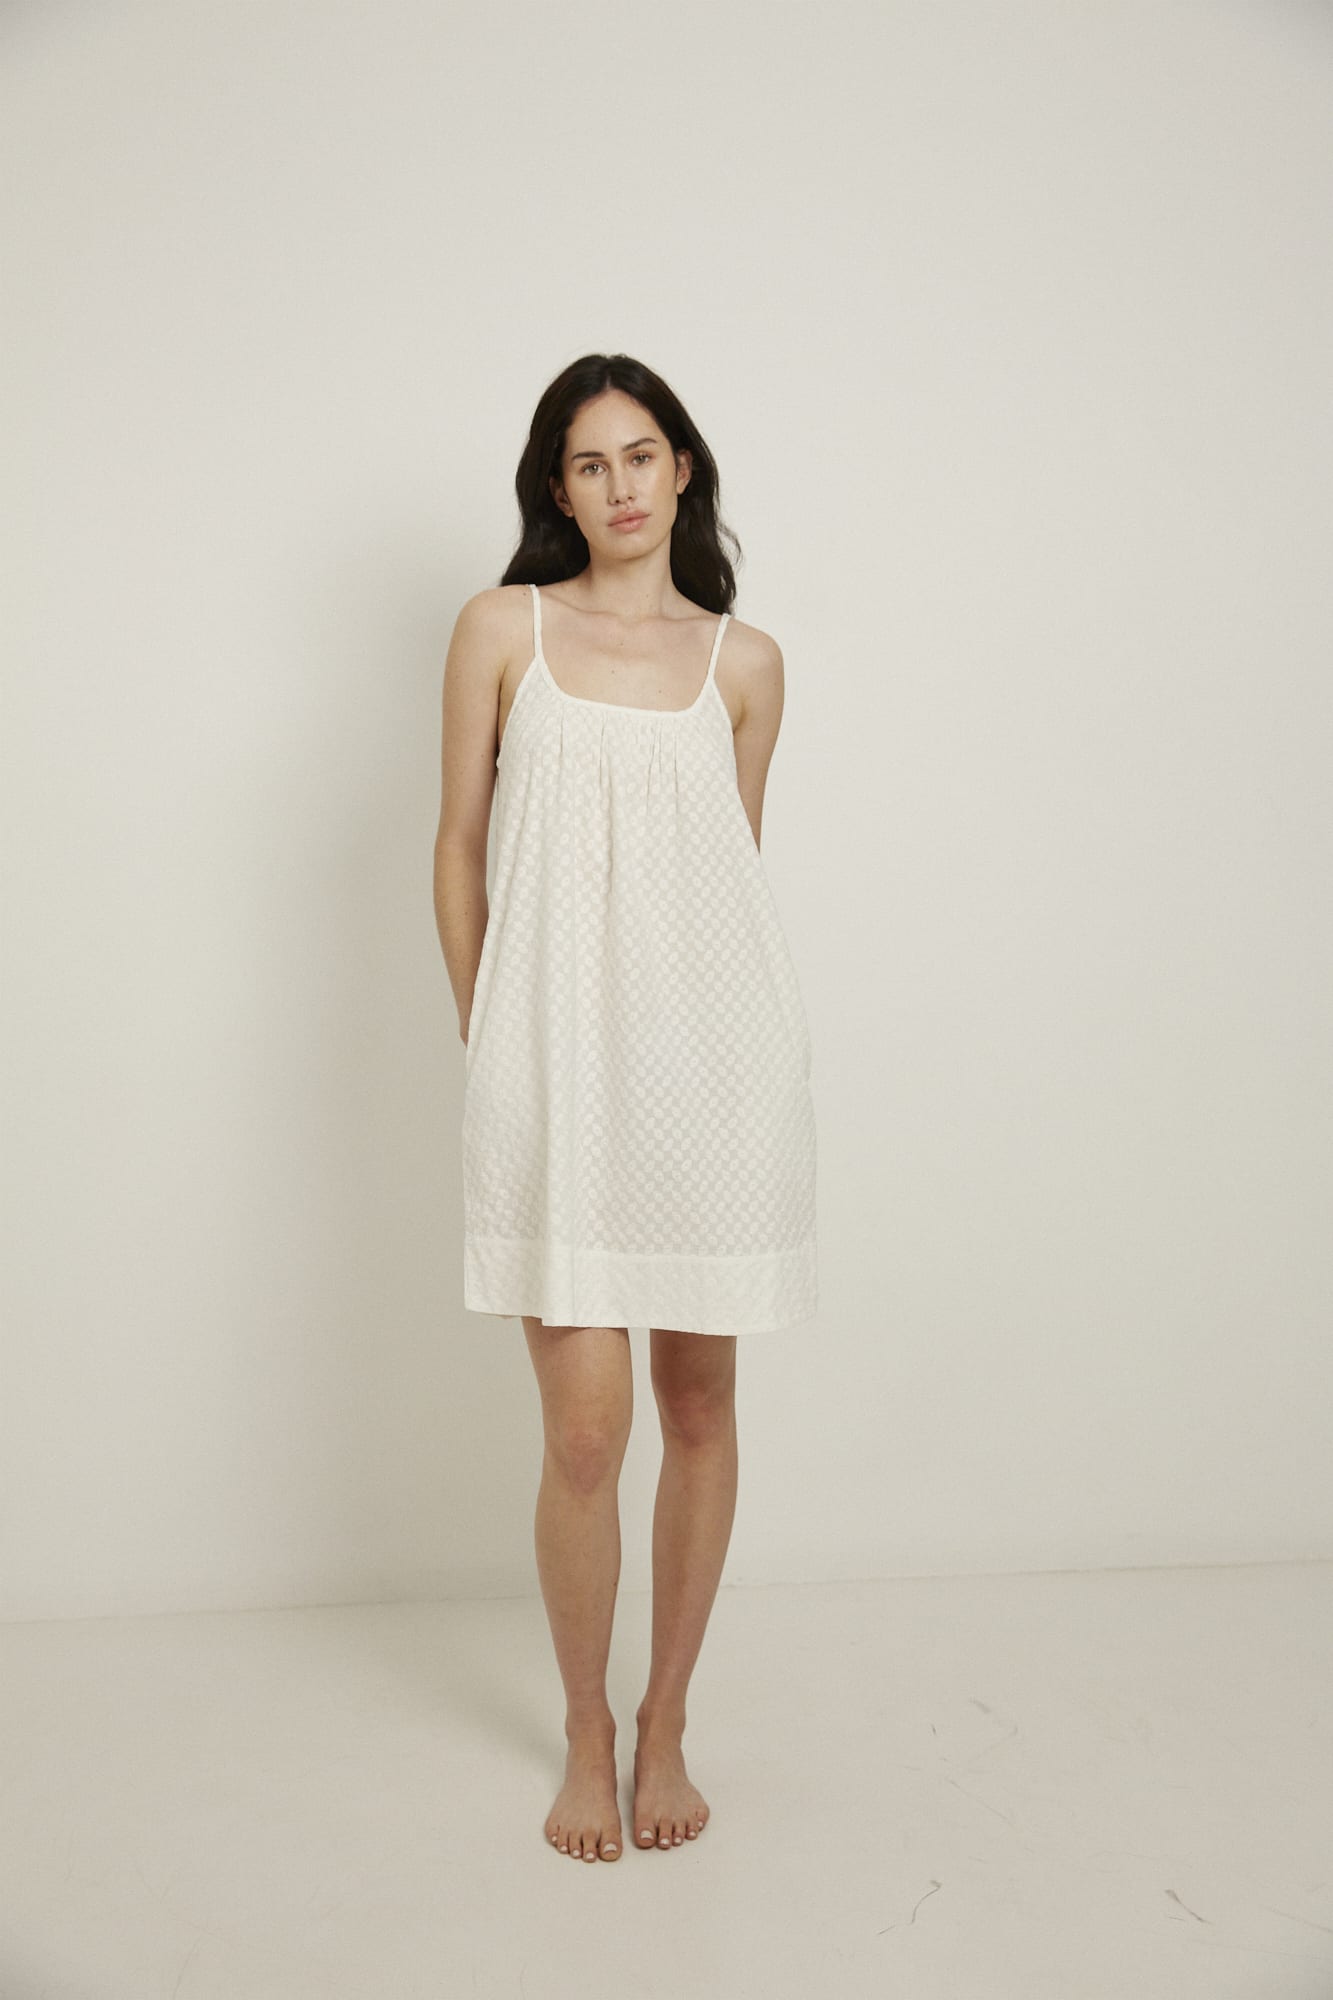 This knee length women’s nightdress dress features a scoop neck, adjustable spaghetti straps and side pockets. Finished with a wide hem, French seams, it is made from 100% organic cotton, in white, and features delicate all over embroidery.